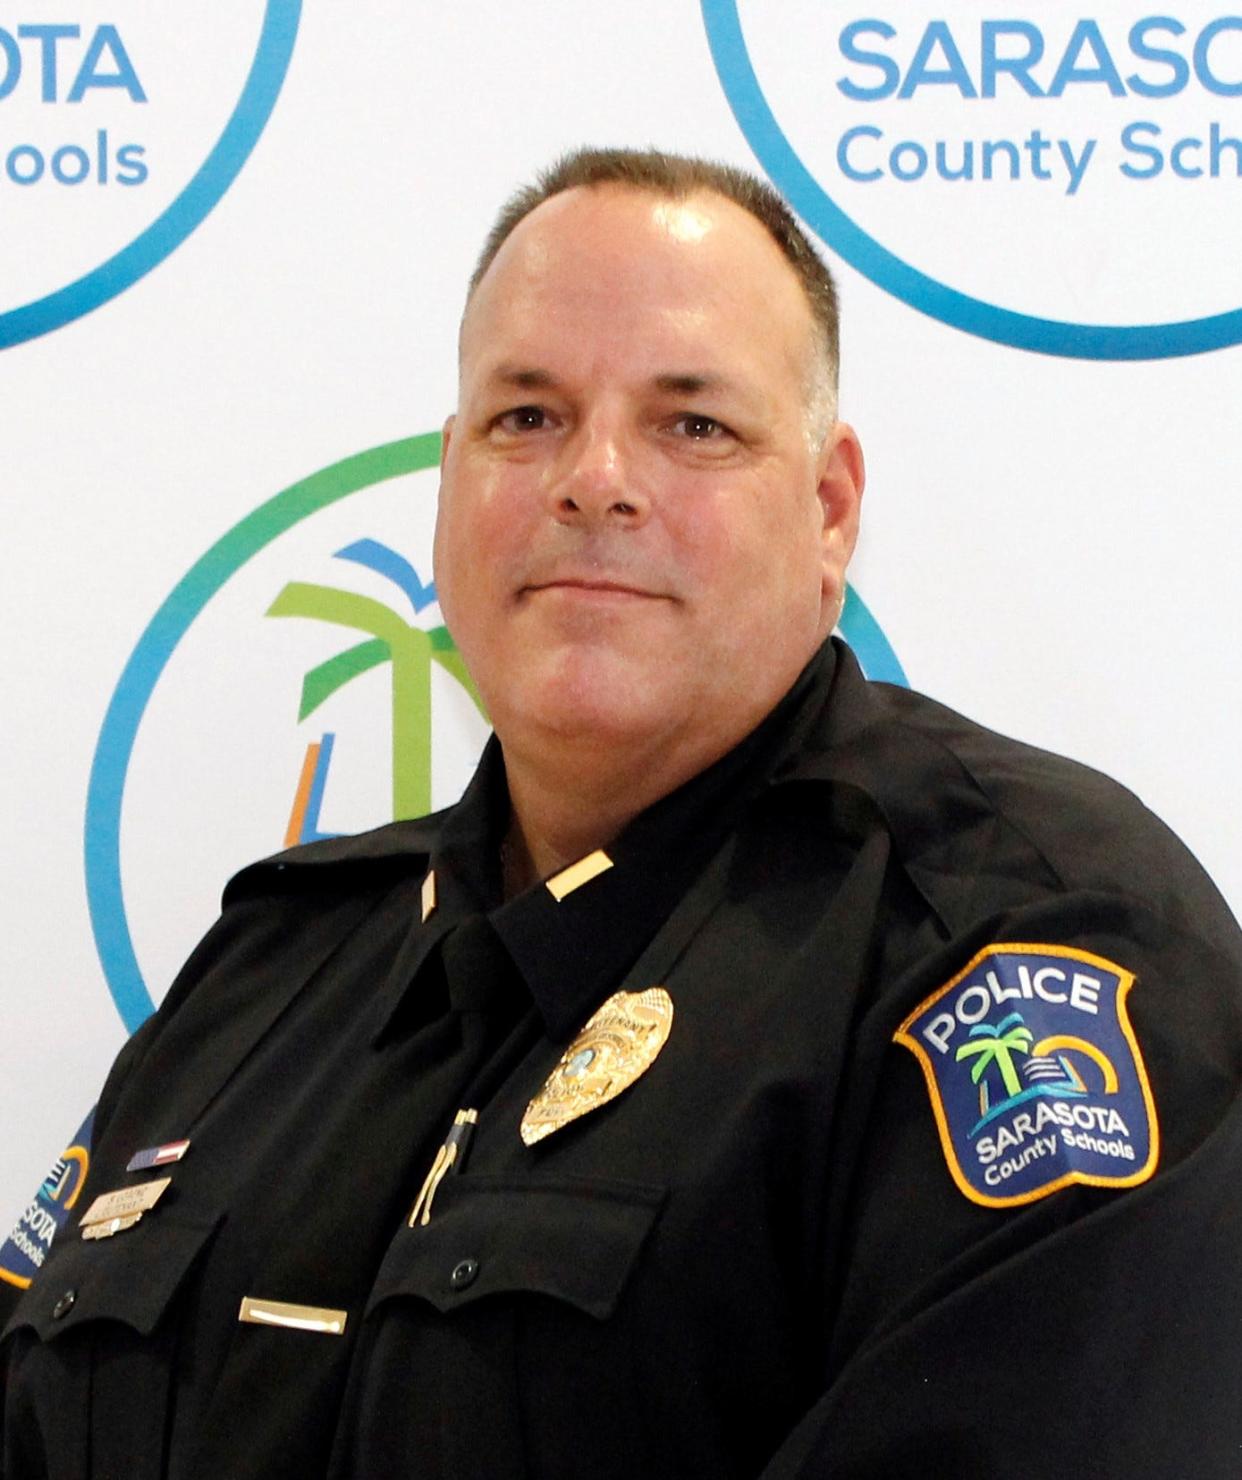 Stephen Lorenz (pictured), the acting chief of the Sarasota County Schools Police Department, was appointed following the removal of Duane Oakes on Friday.